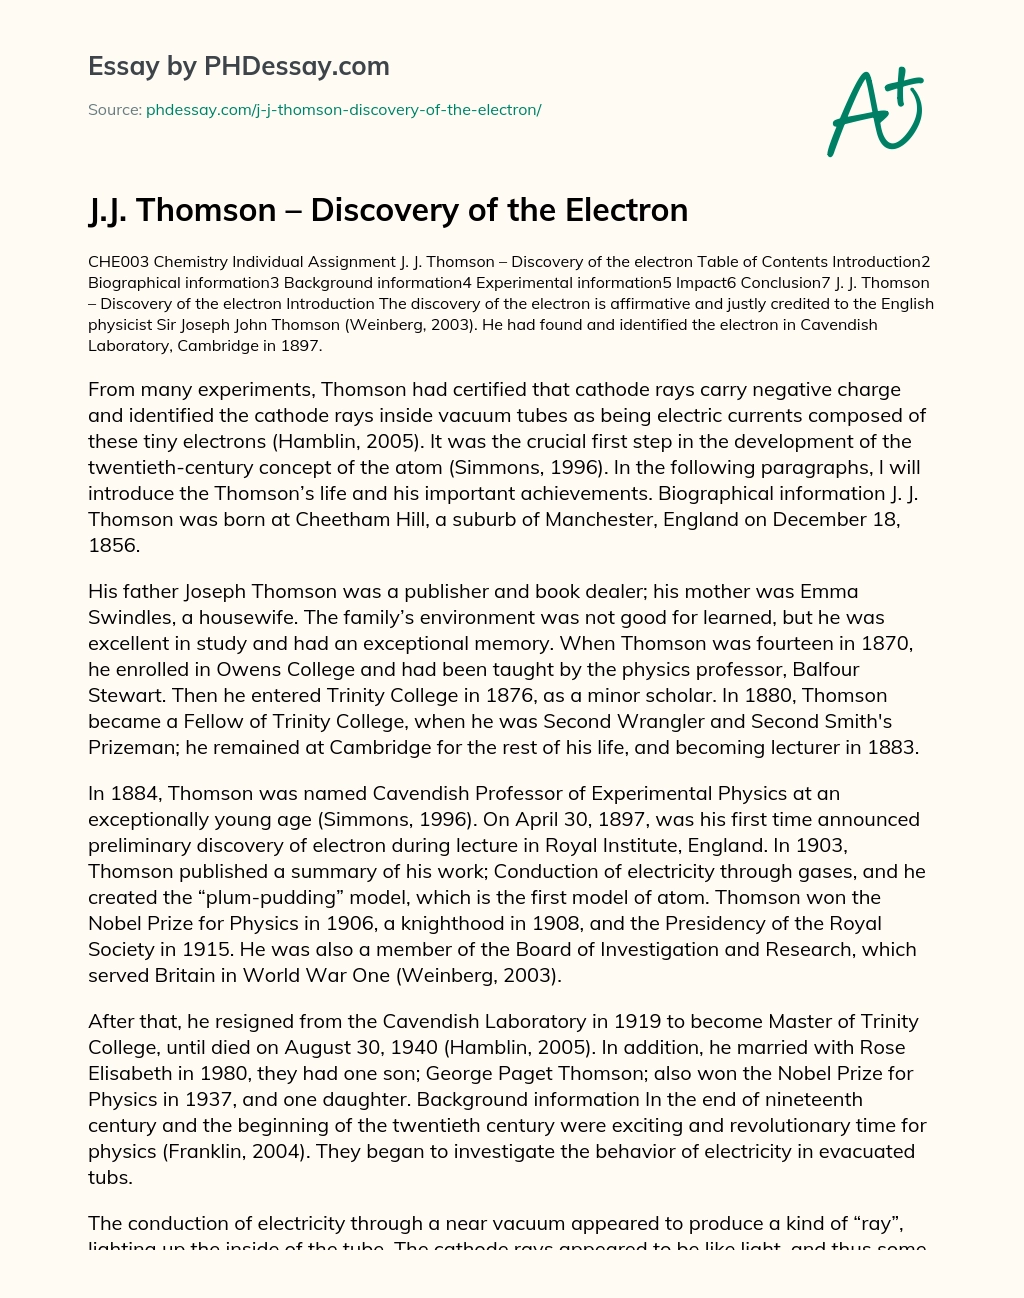 J.J. Thomson – Discovery of the Electron essay